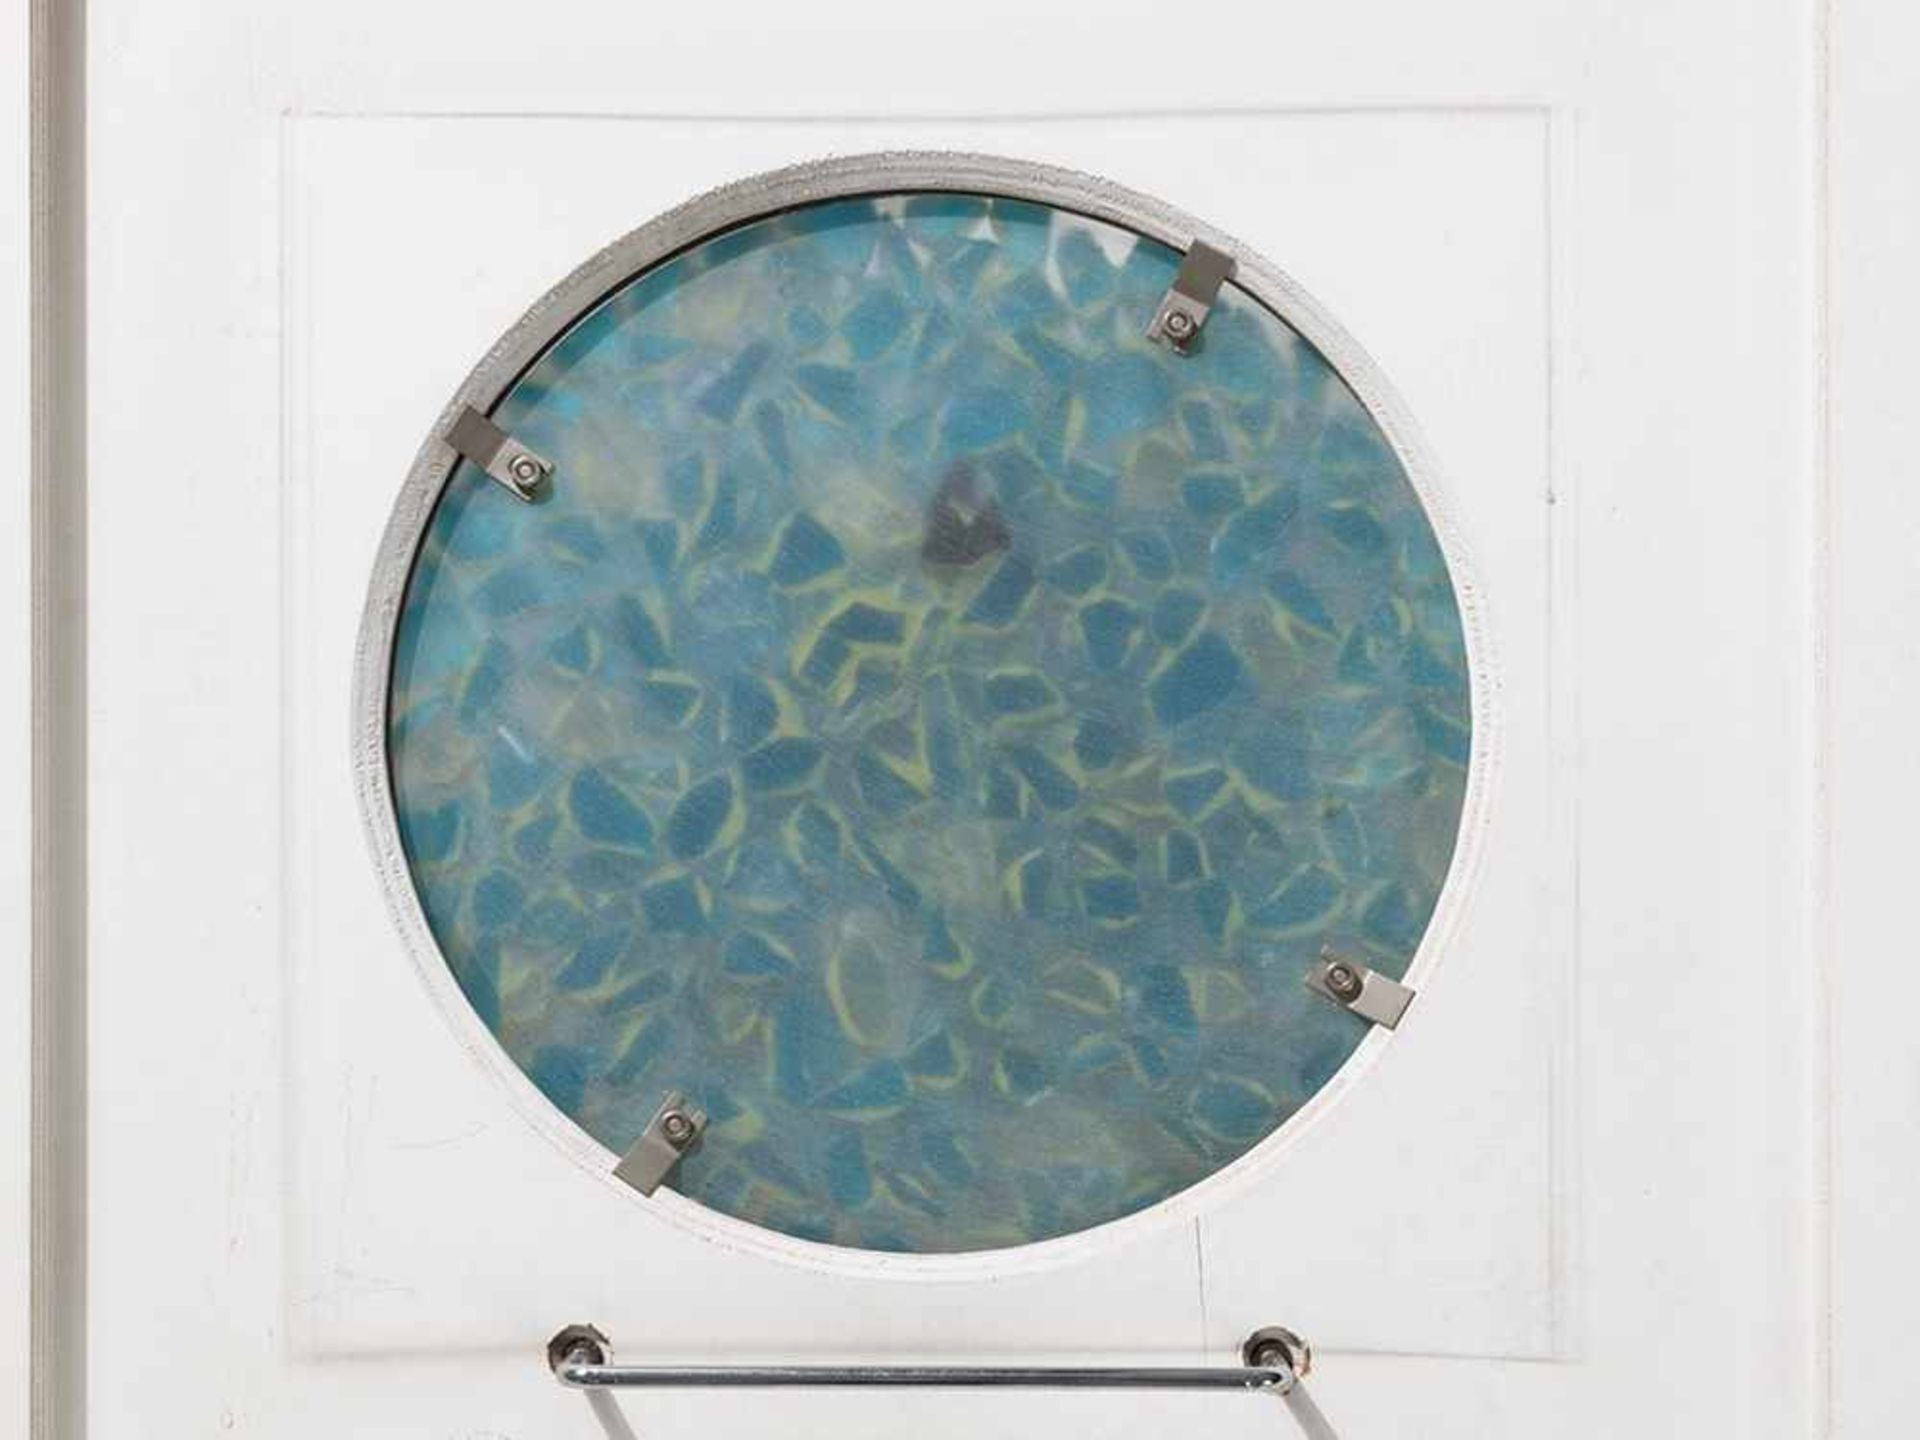 Angelo Brotto, Sconce "Oceano Blu", Esperia, 1973 Glass, colored in various shades of blue, - Bild 8 aus 9